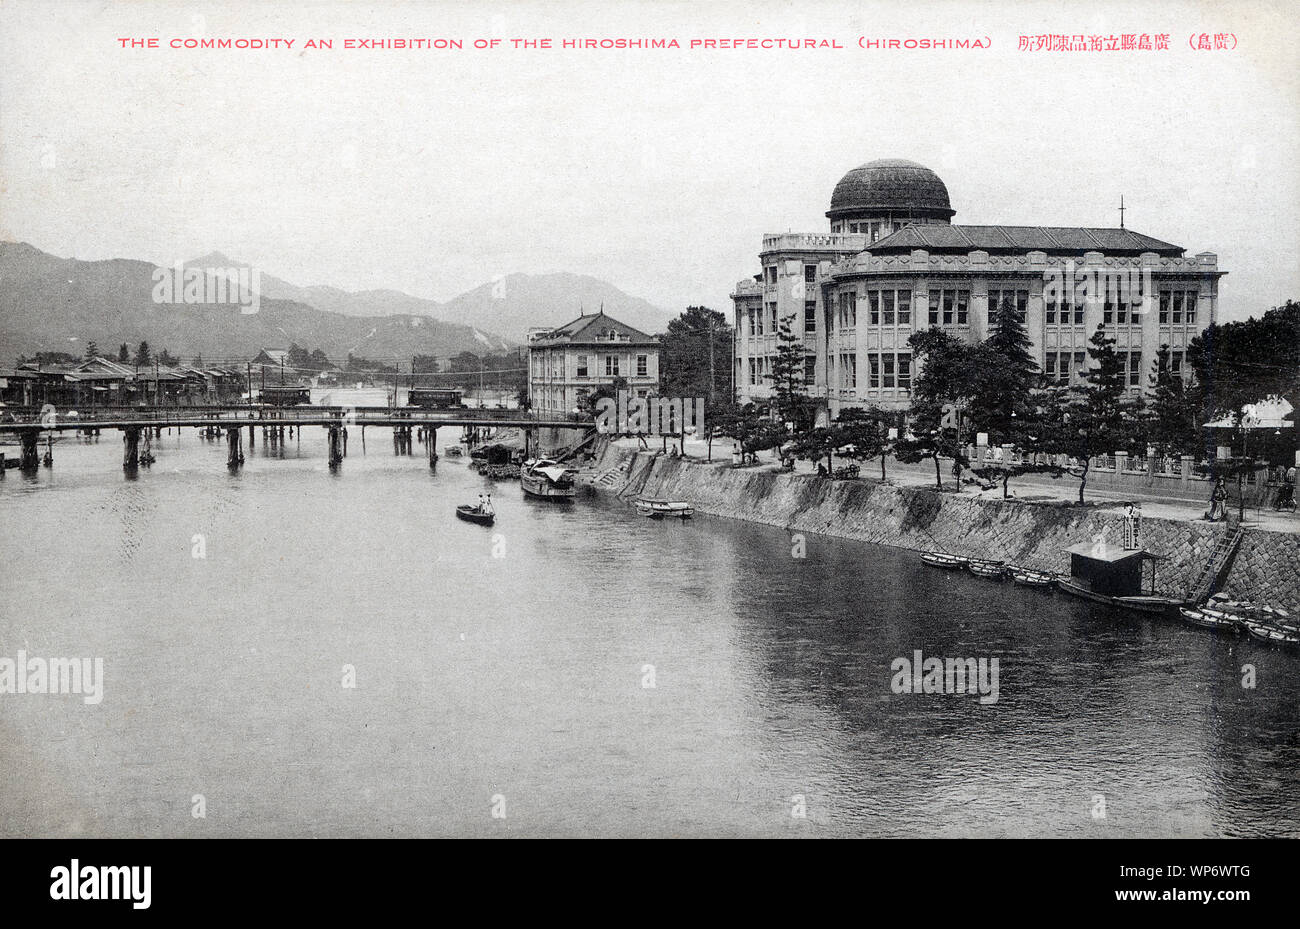 [ 1930s Japan - Hiroshima A-Bomb Dome ] —   Hiroshima Prefectural Products Exhibition Hall and Motoyasugawa River (元安川) in Hiroshima. Photographed from Motoyasu Bridge (元安橋) between 1921 (Taisho 10) and 1933 (Showa 8).  The 6 August 1945 (Showa 20) nuclear explosion that devastated Hiroshima found place almost directly above the building.  20th century vintage postcard. Stock Photo